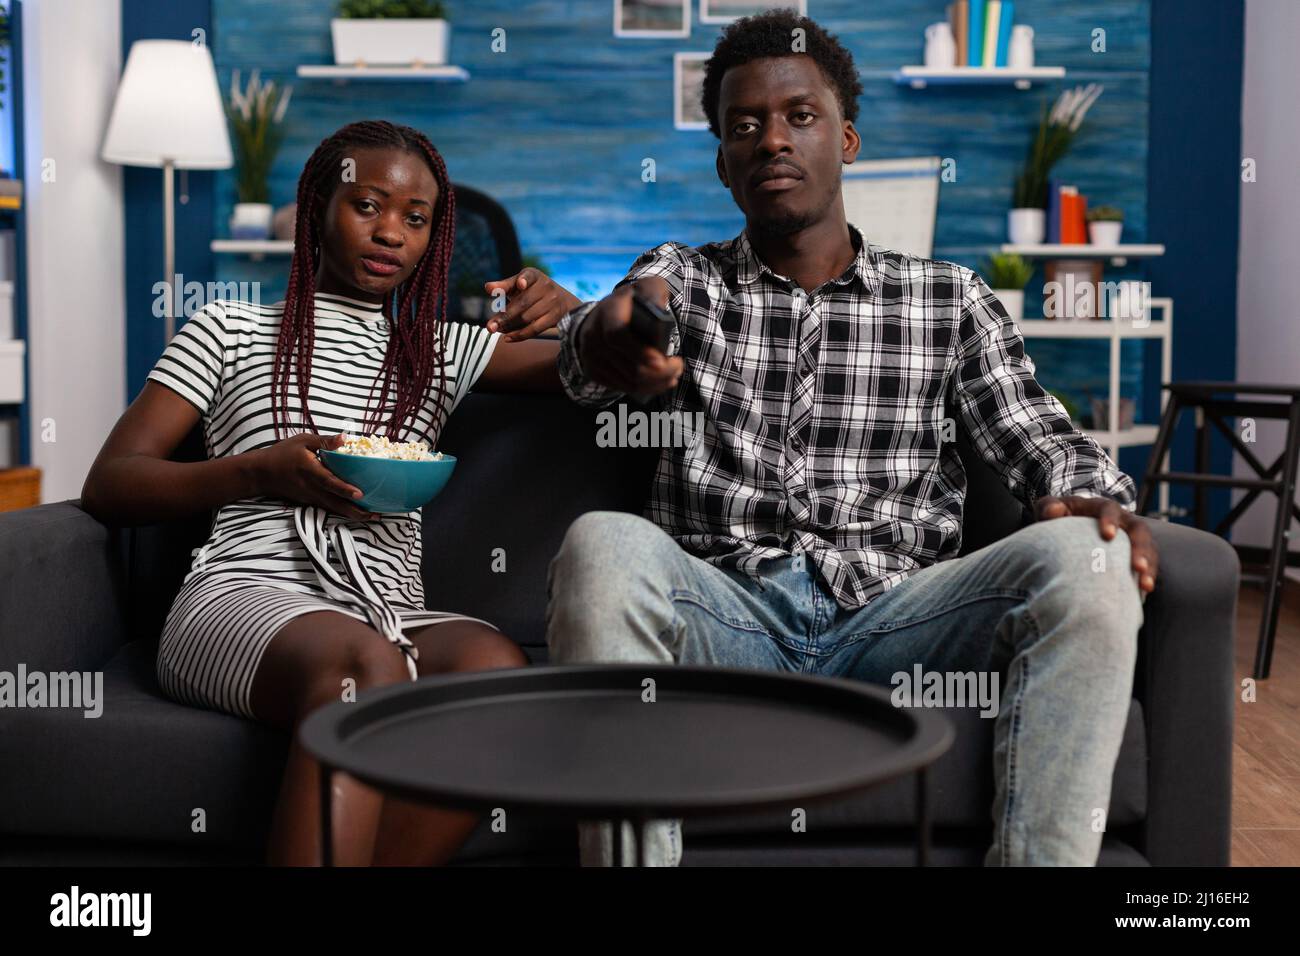 African american woman eating popcorn on sofa while young man changing channels on TV using remote. Adult people enjoying being together while watching movies and eating snacks at home. Stock Photo